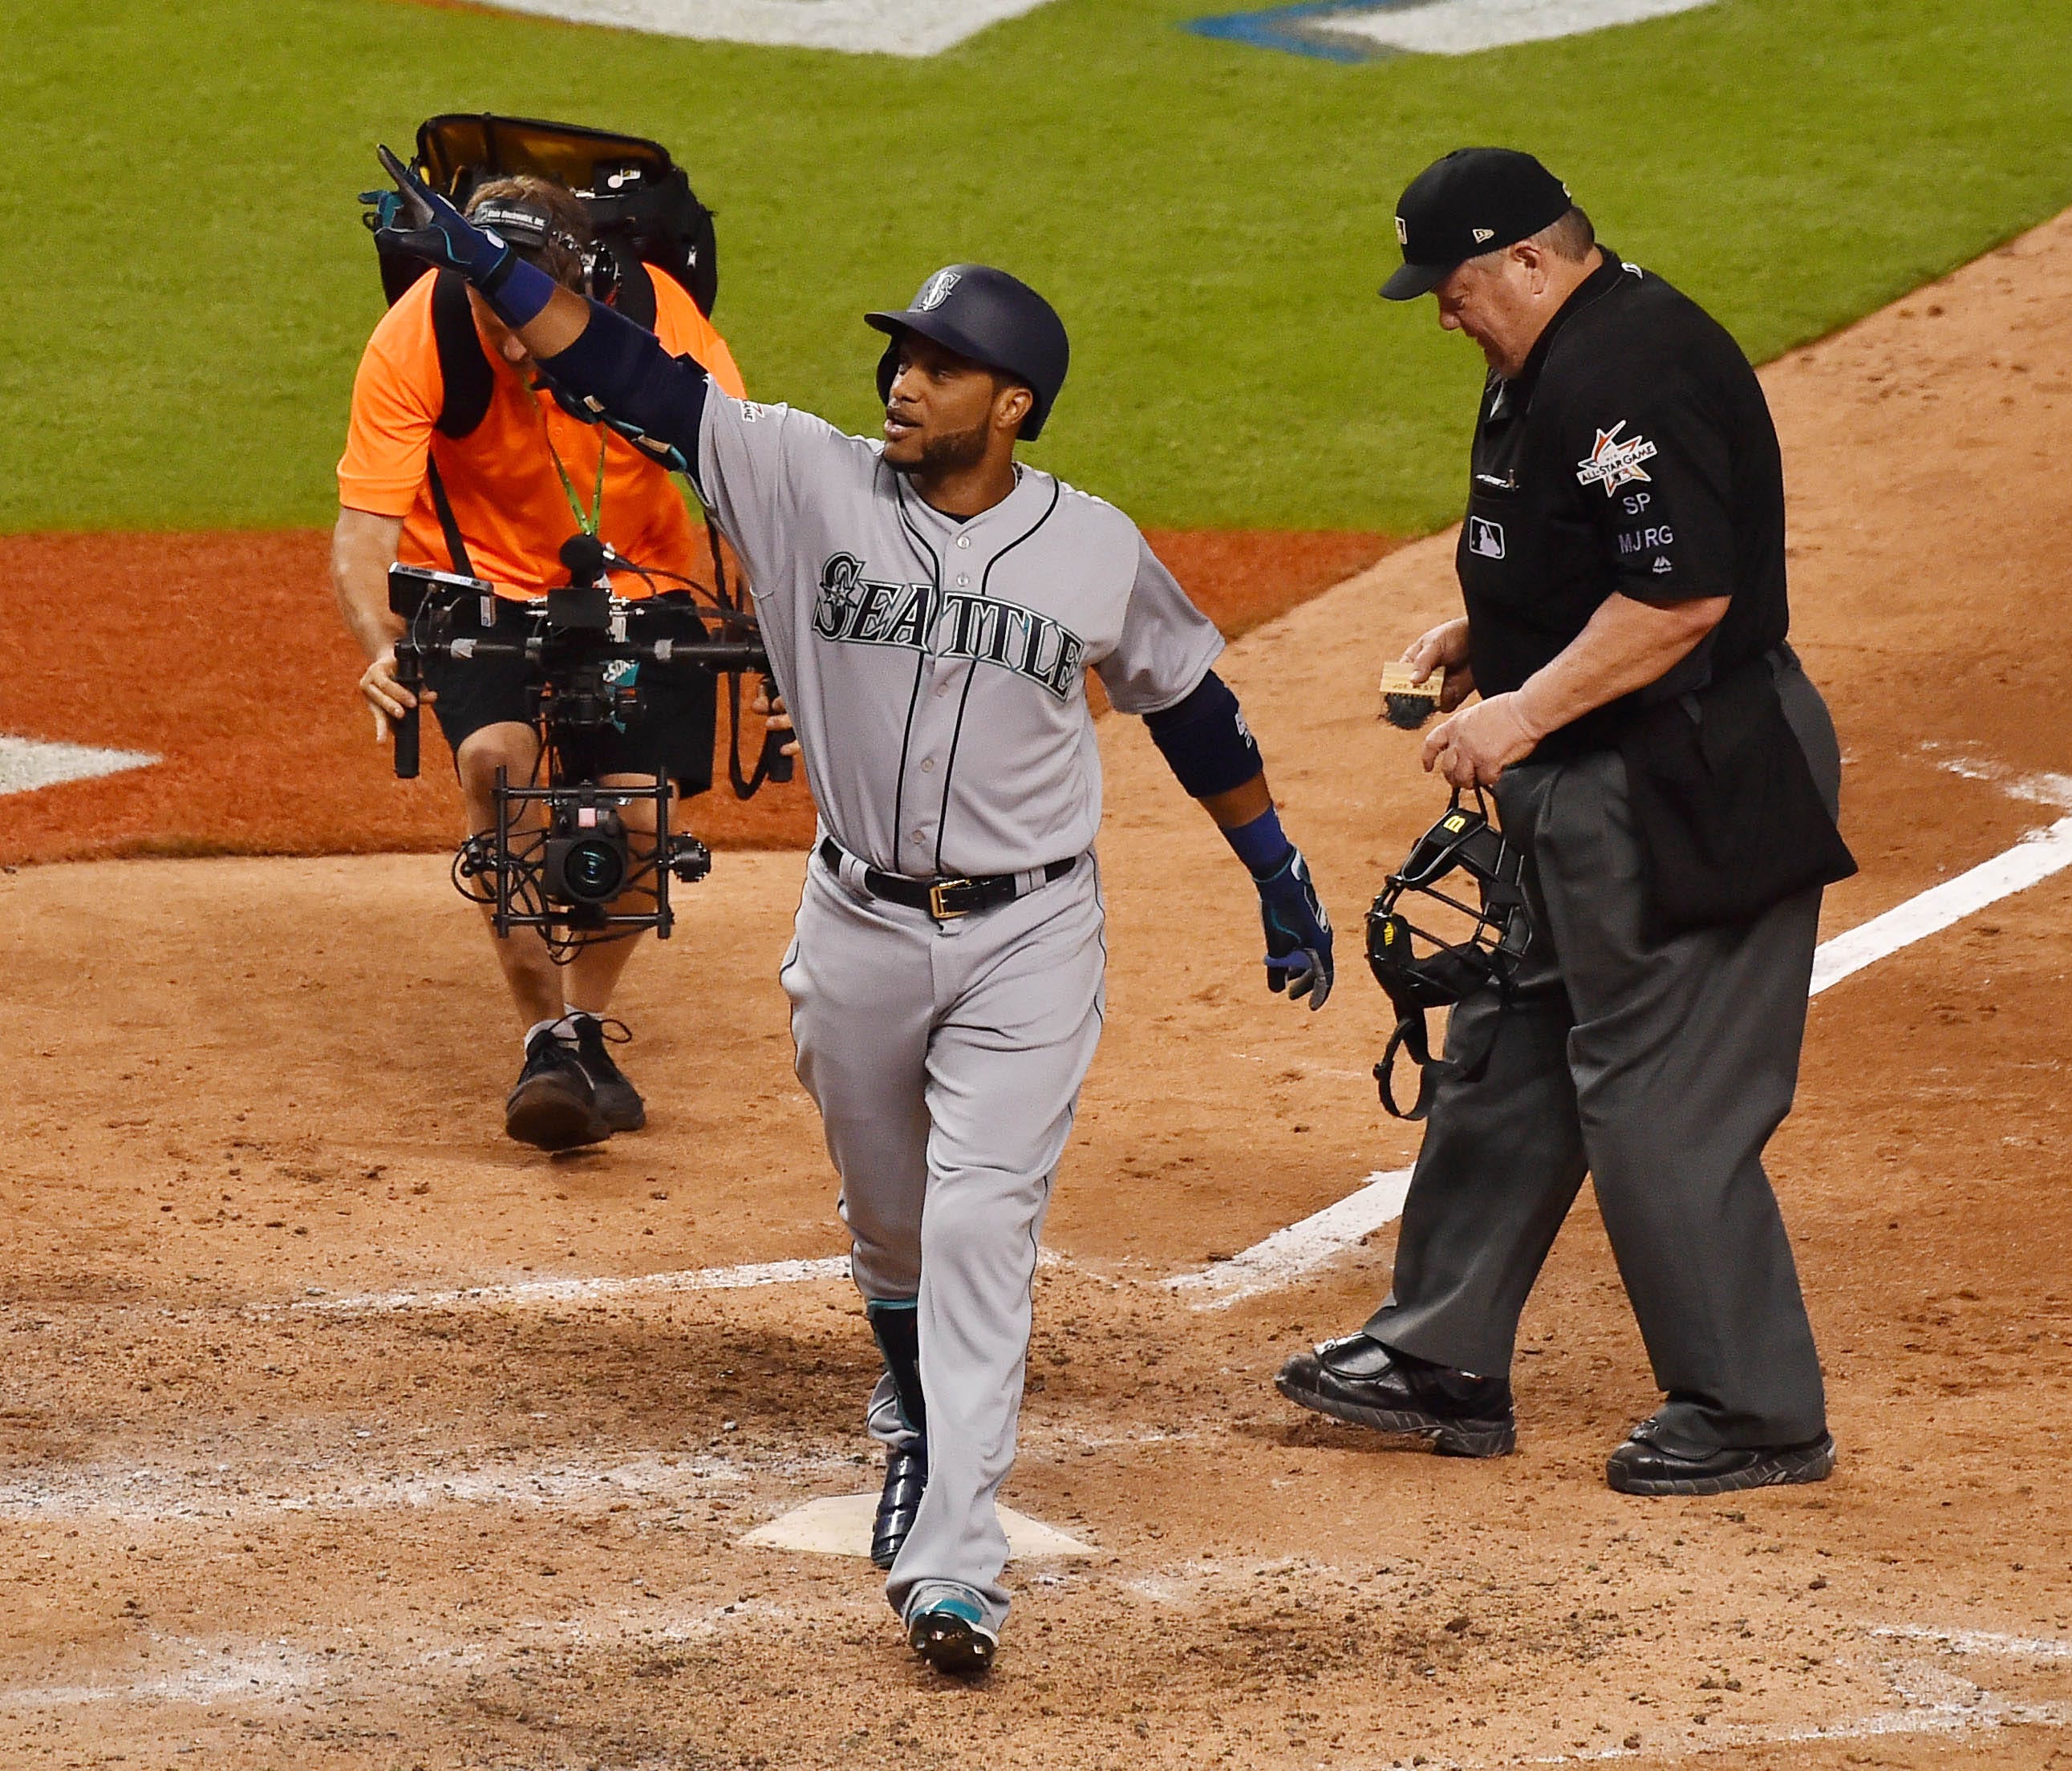 Robinson Cano rounds the bases after a solo home run in the 10th inning.